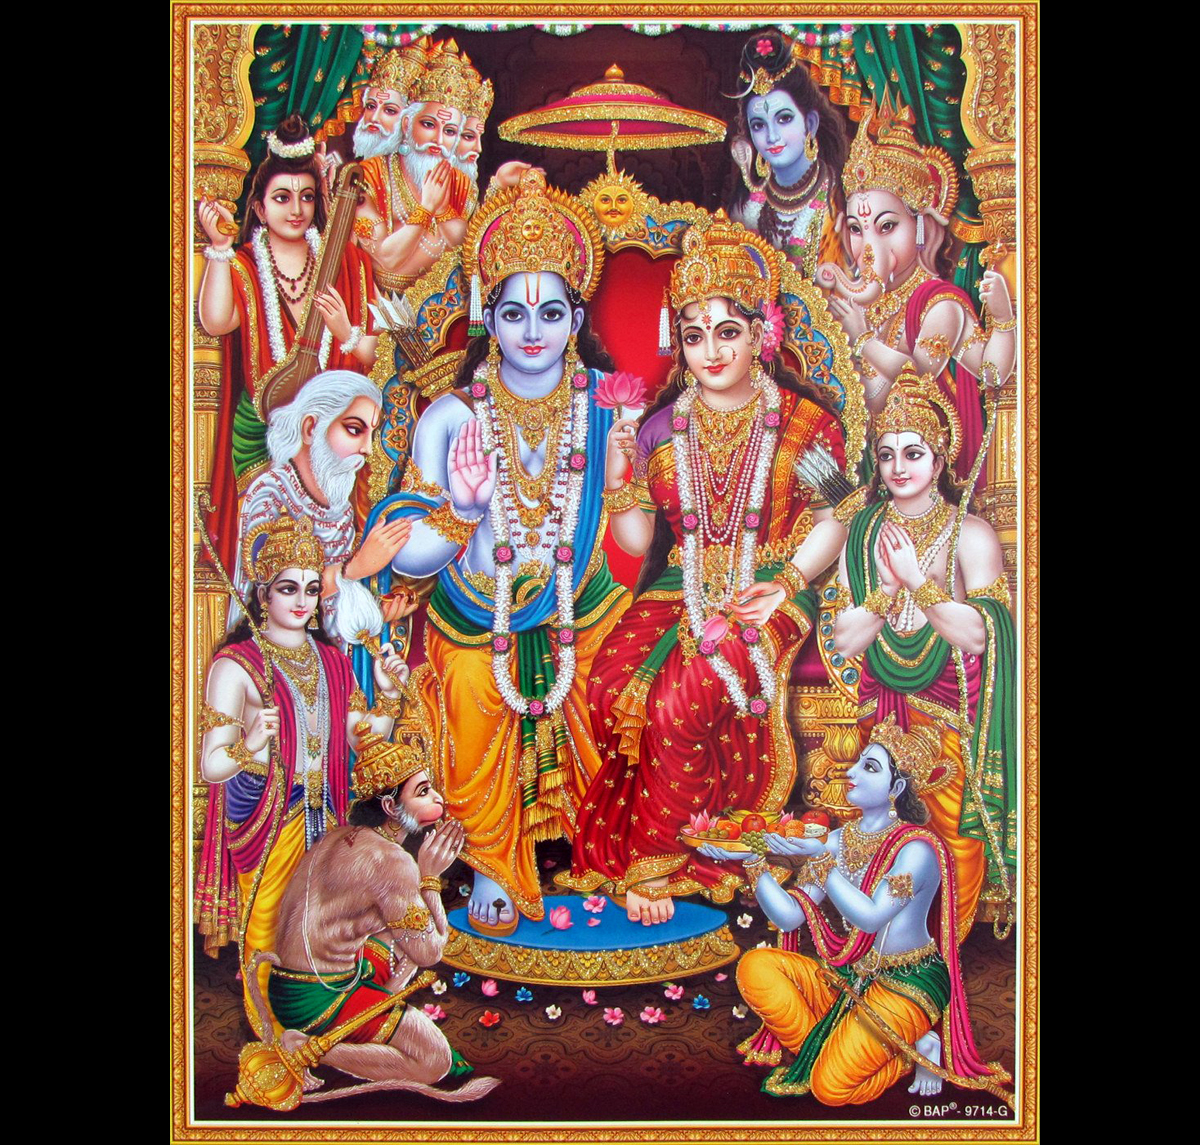 Sri Ram Images: An Incredible Collection of Over 999+ Images in Full 4K Quality